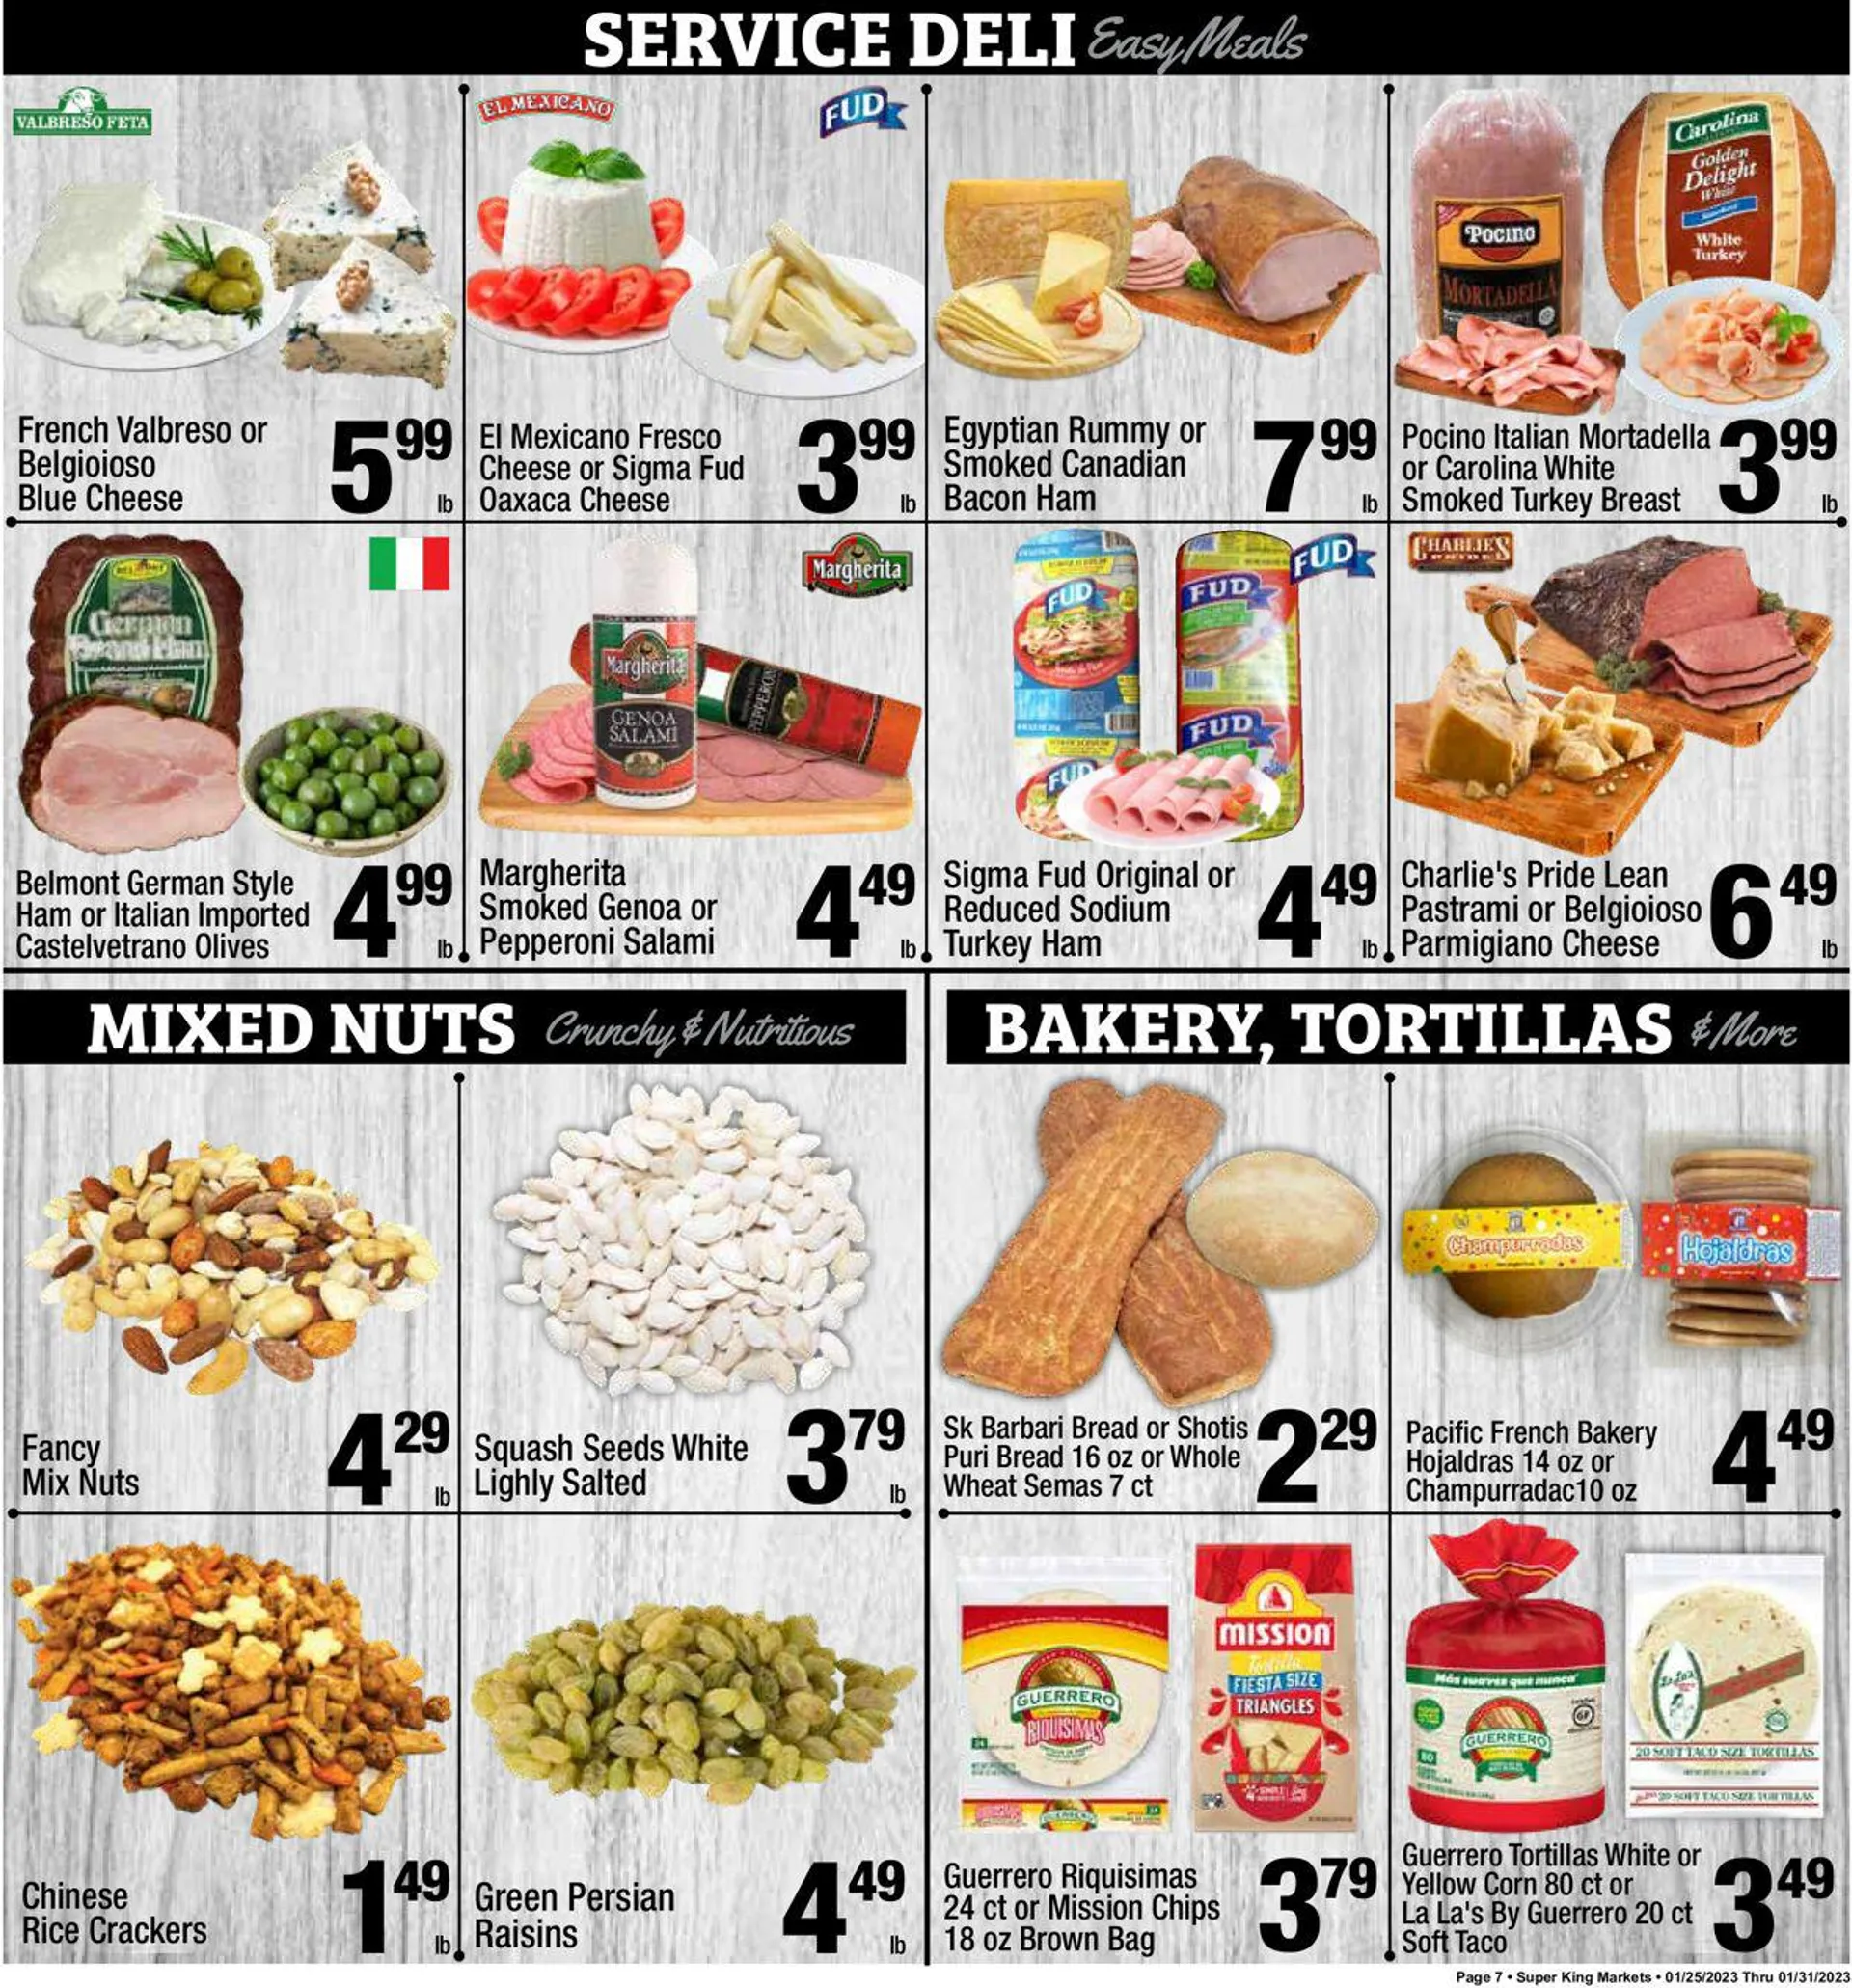 Super King Market Current weekly ad - 7